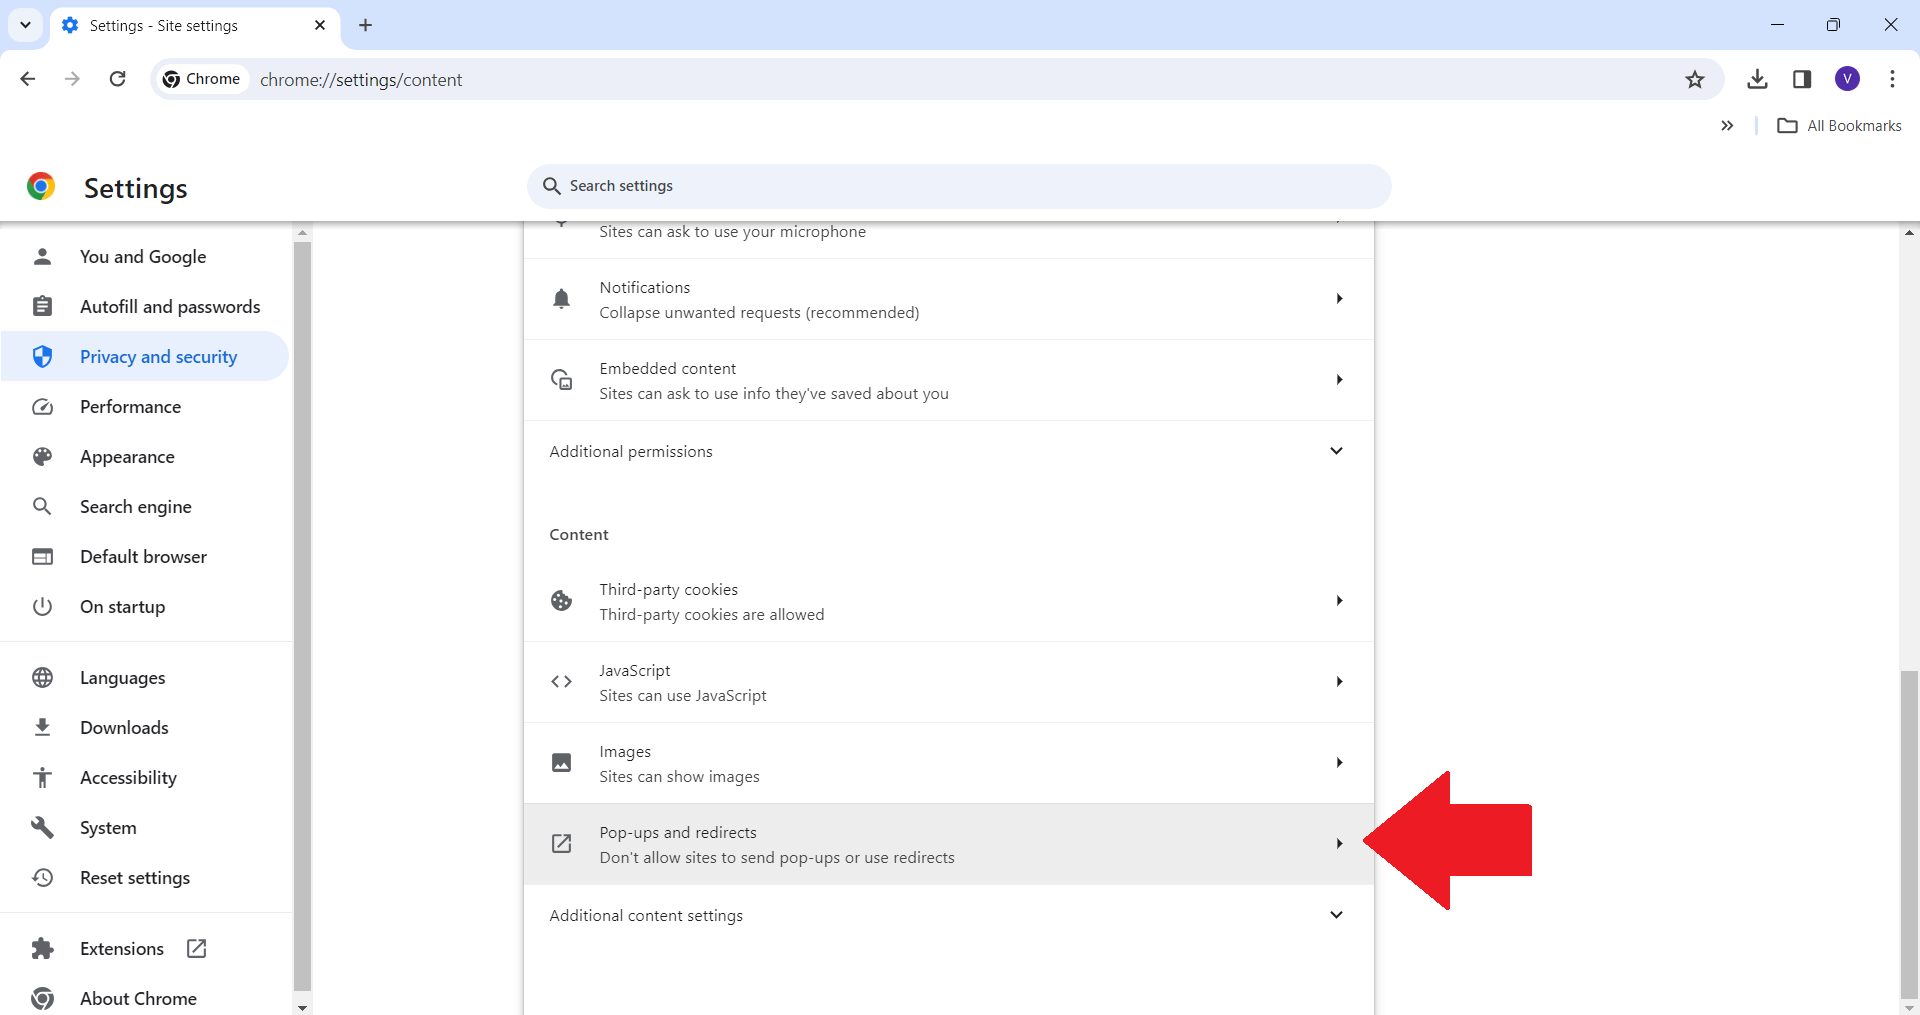 Chrome - Desktop - Pop-Ups and redirects